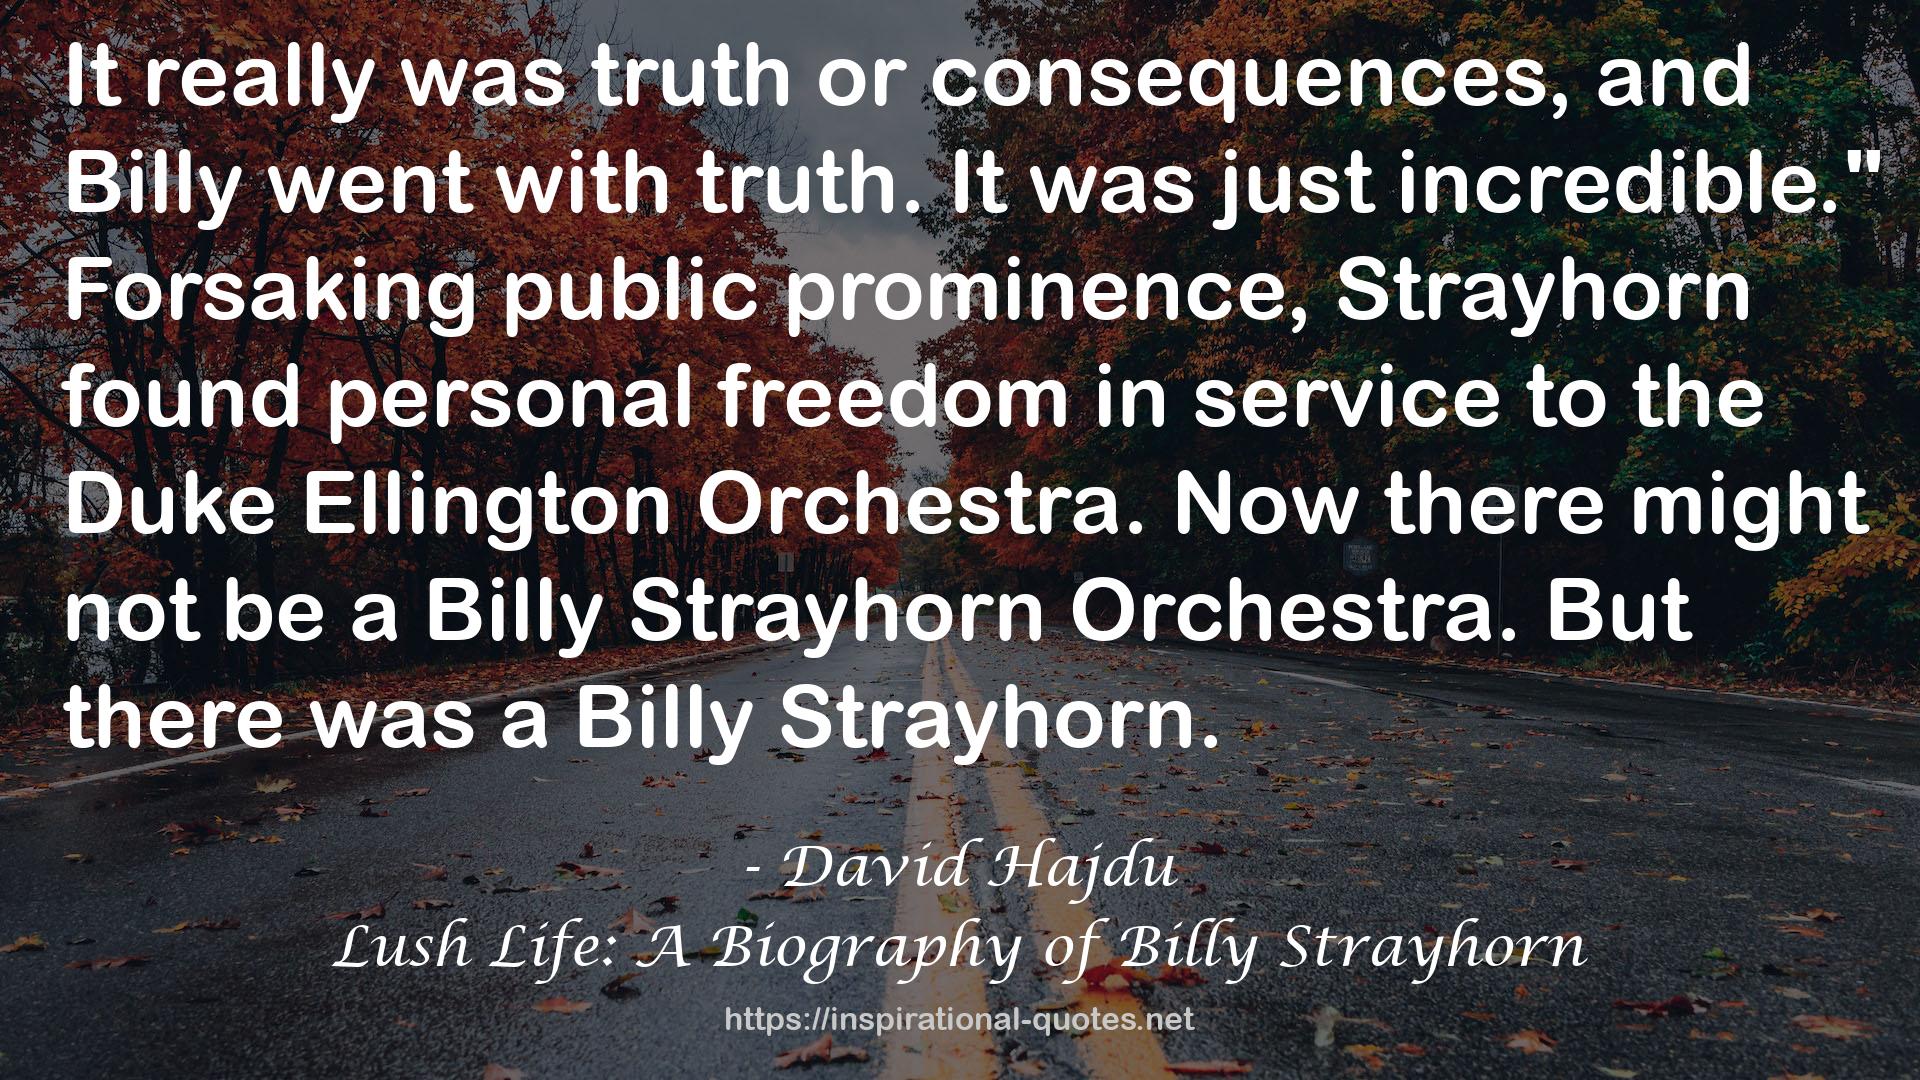 Lush Life: A Biography of Billy Strayhorn QUOTES